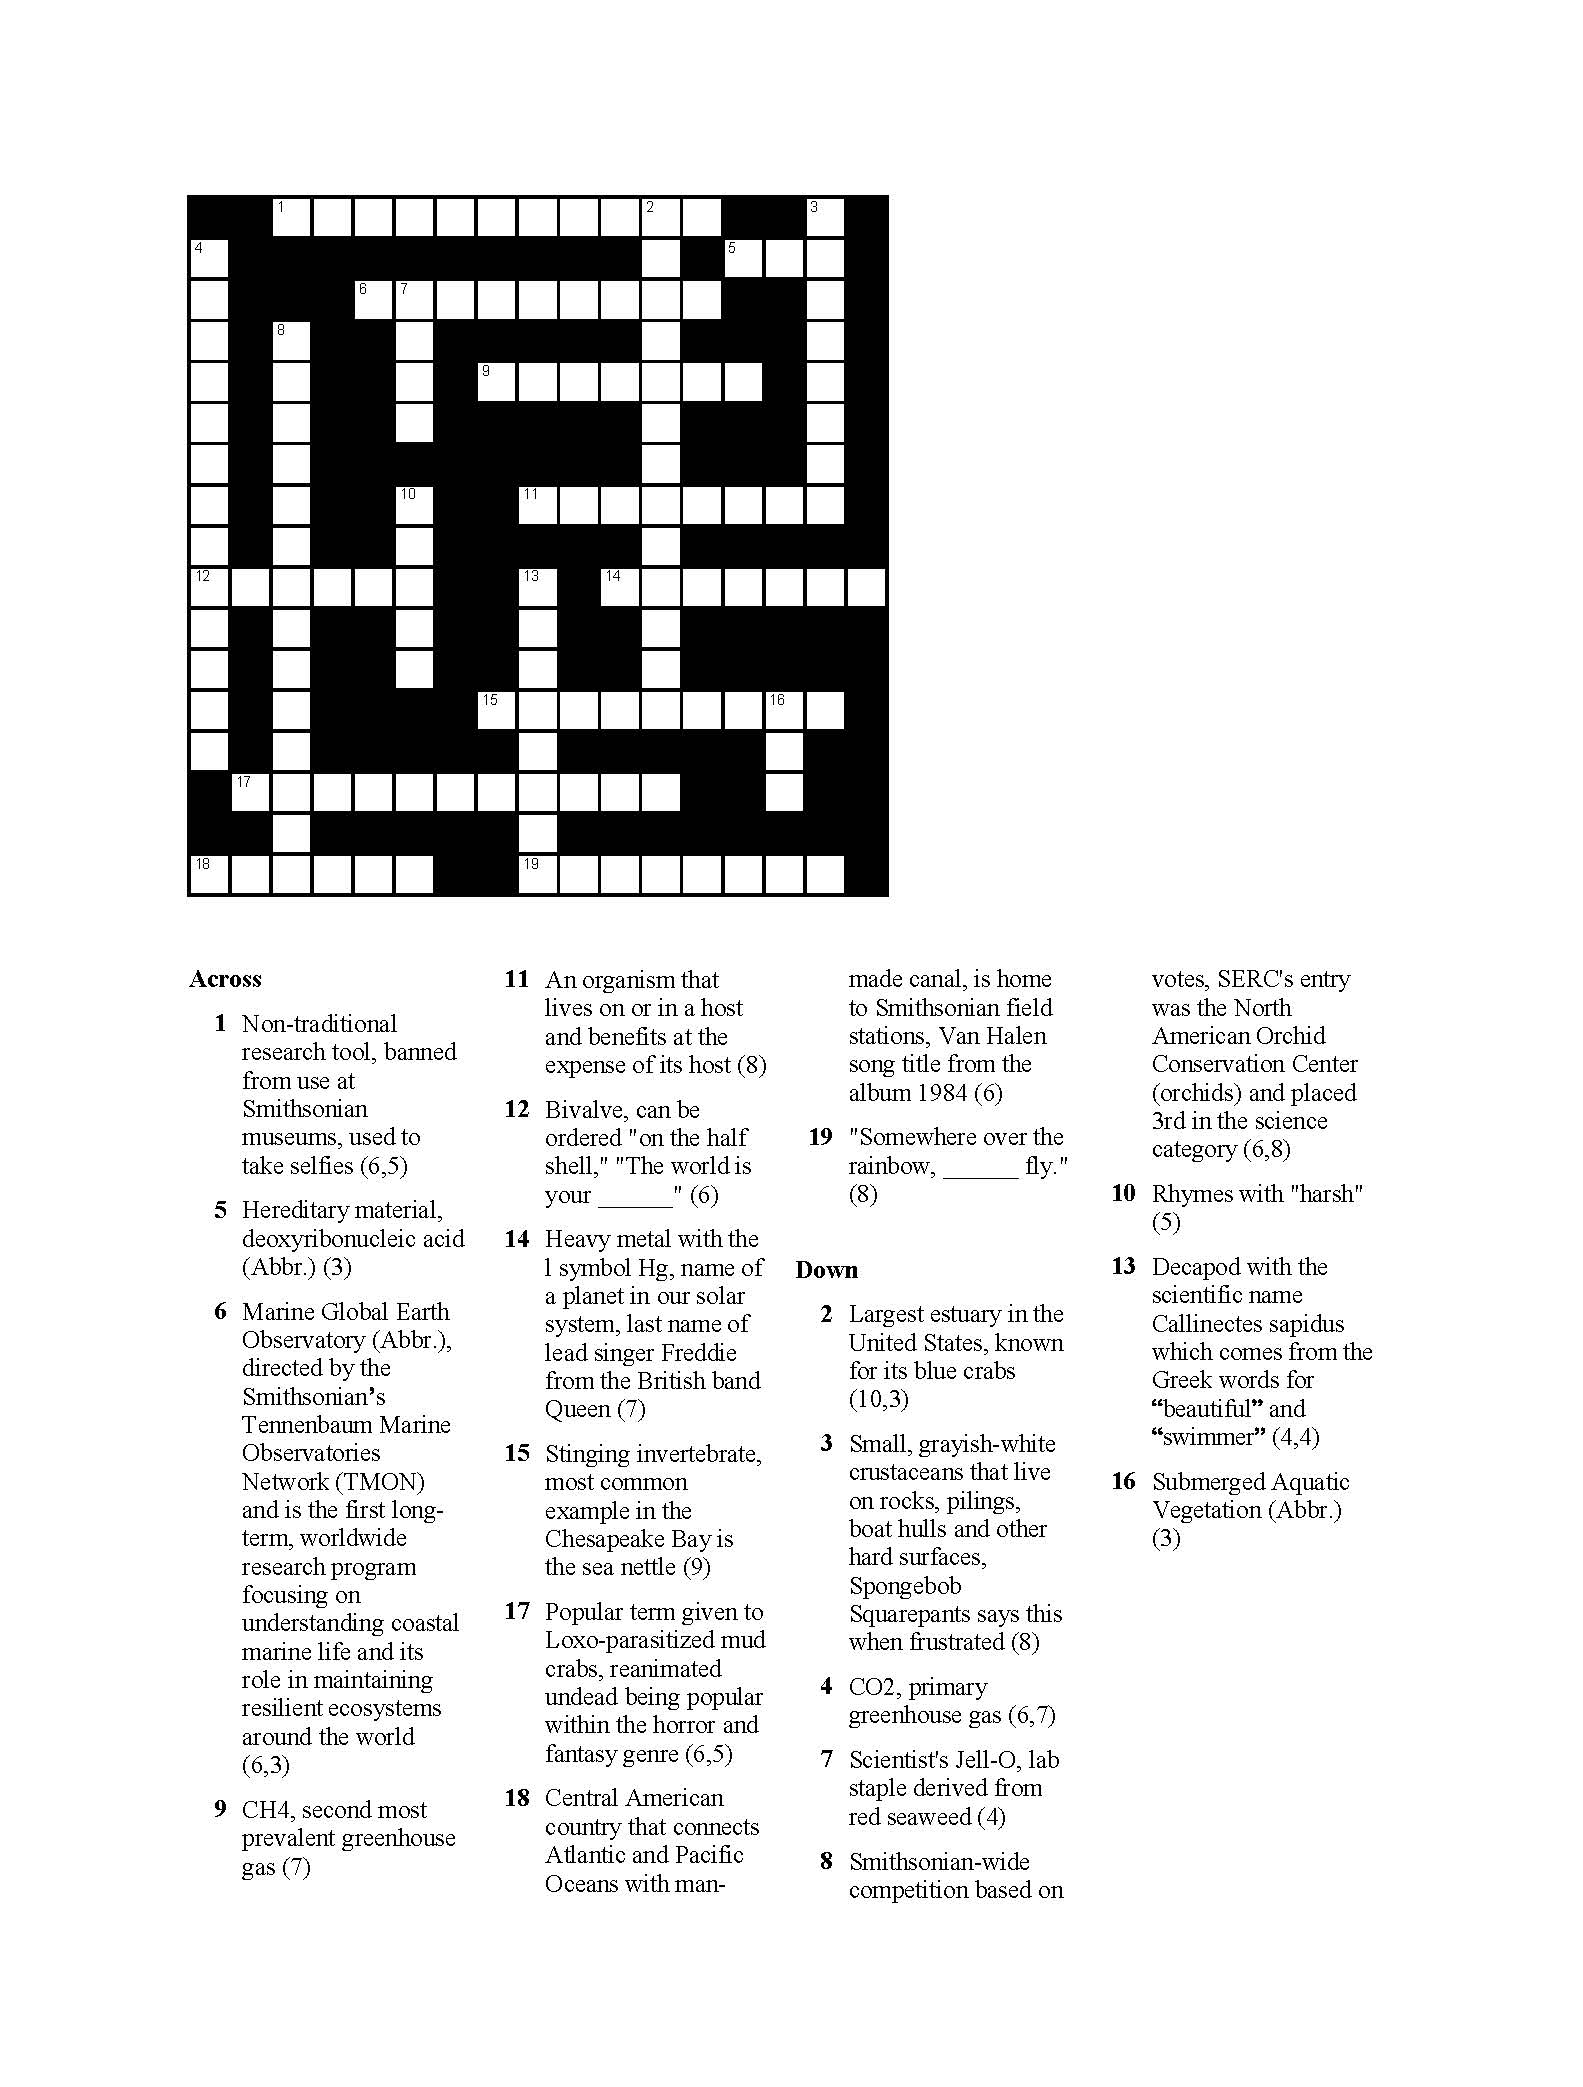 Shorelines Blog Archive A Crossword Puzzle With Ecology Flair Shorelines